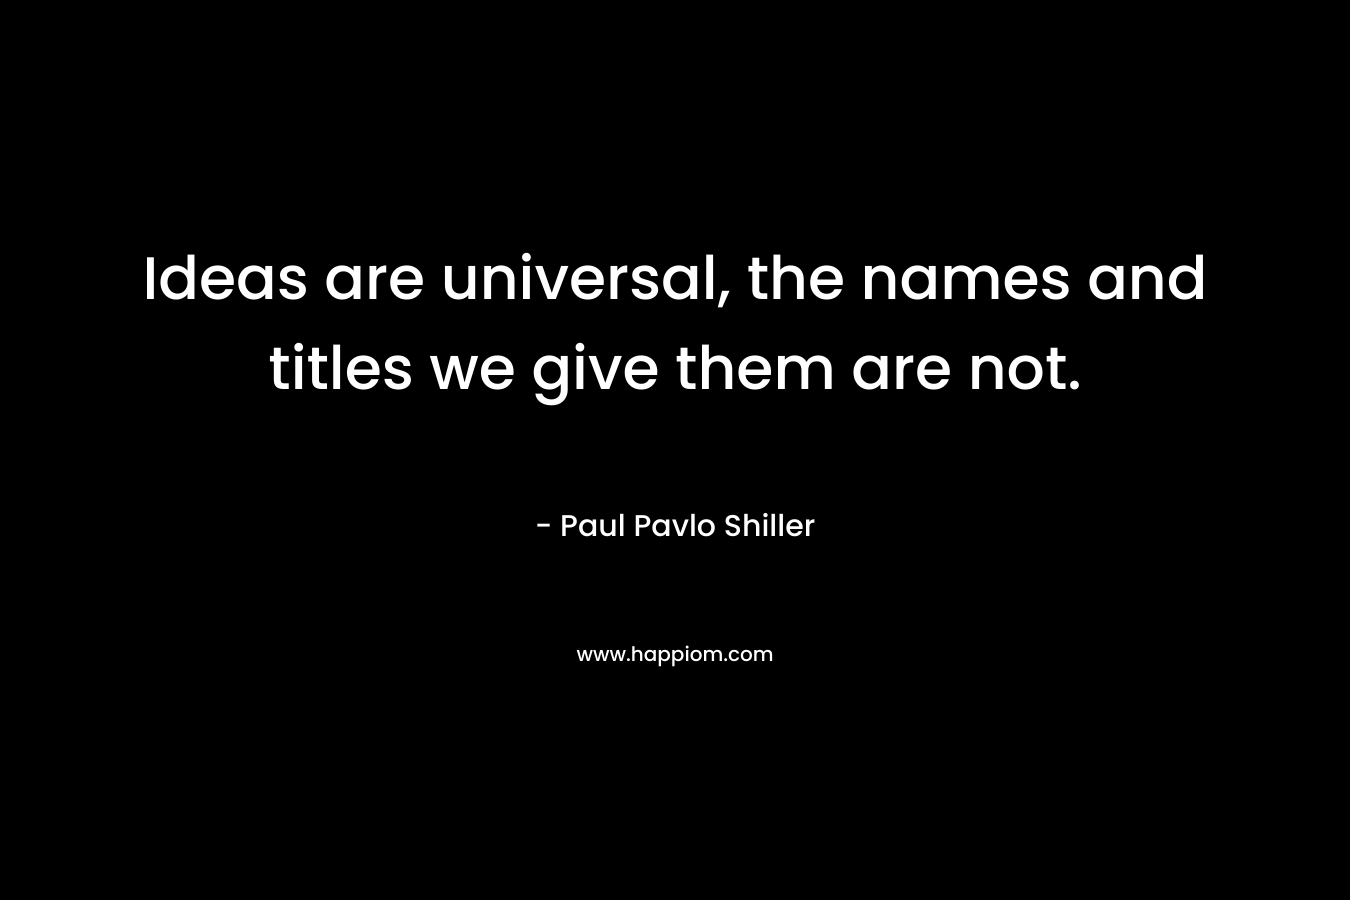 Ideas are universal, the names and titles we give them are not.